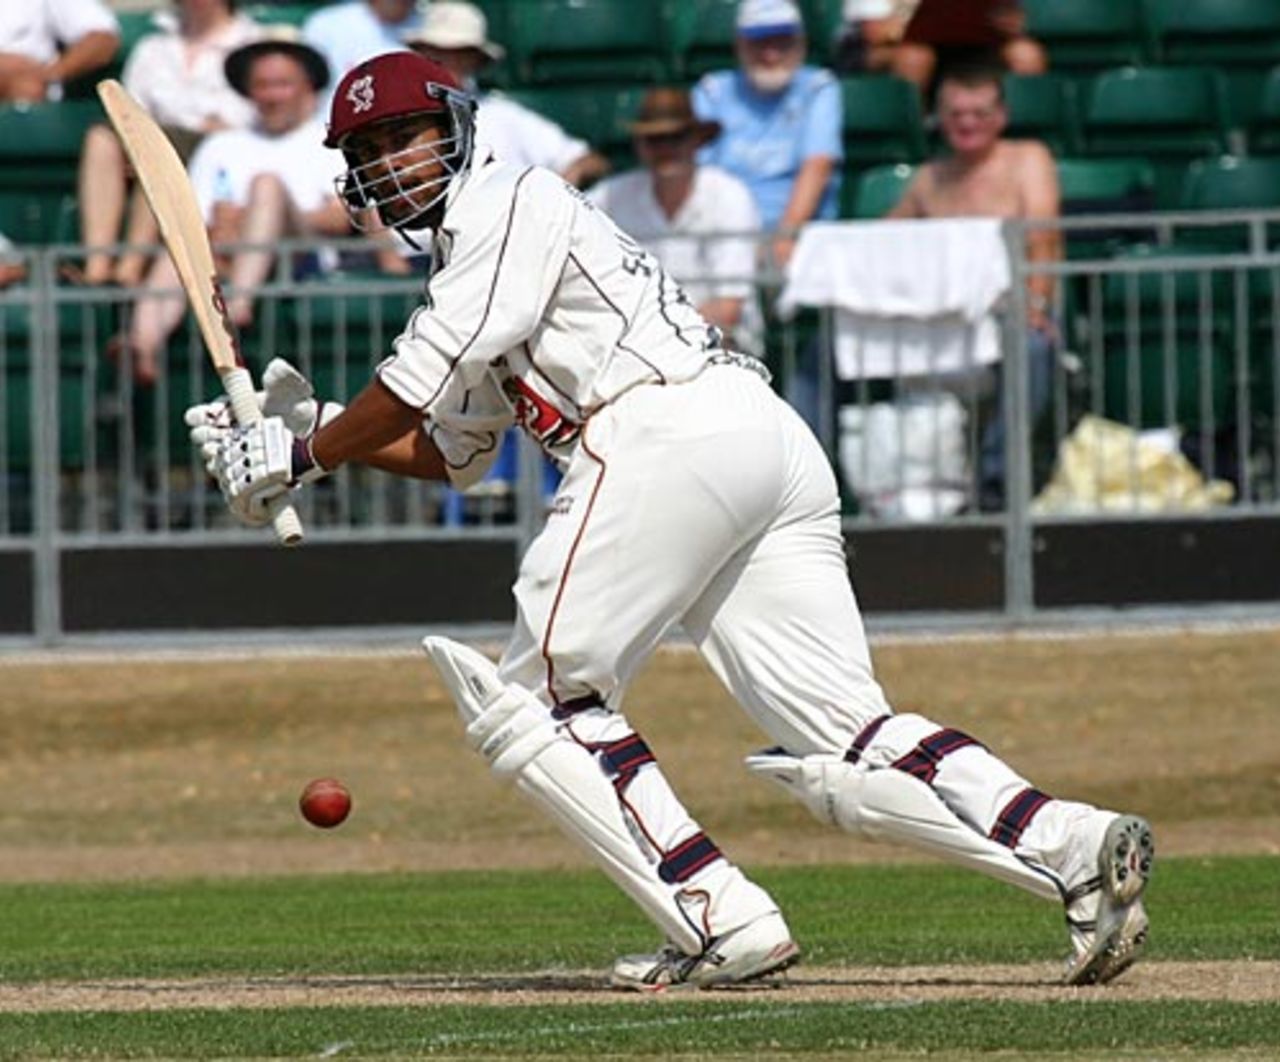 Arul Suppiah on his way to 71, Surrey v Somerset, Guildford, July 19, 2006